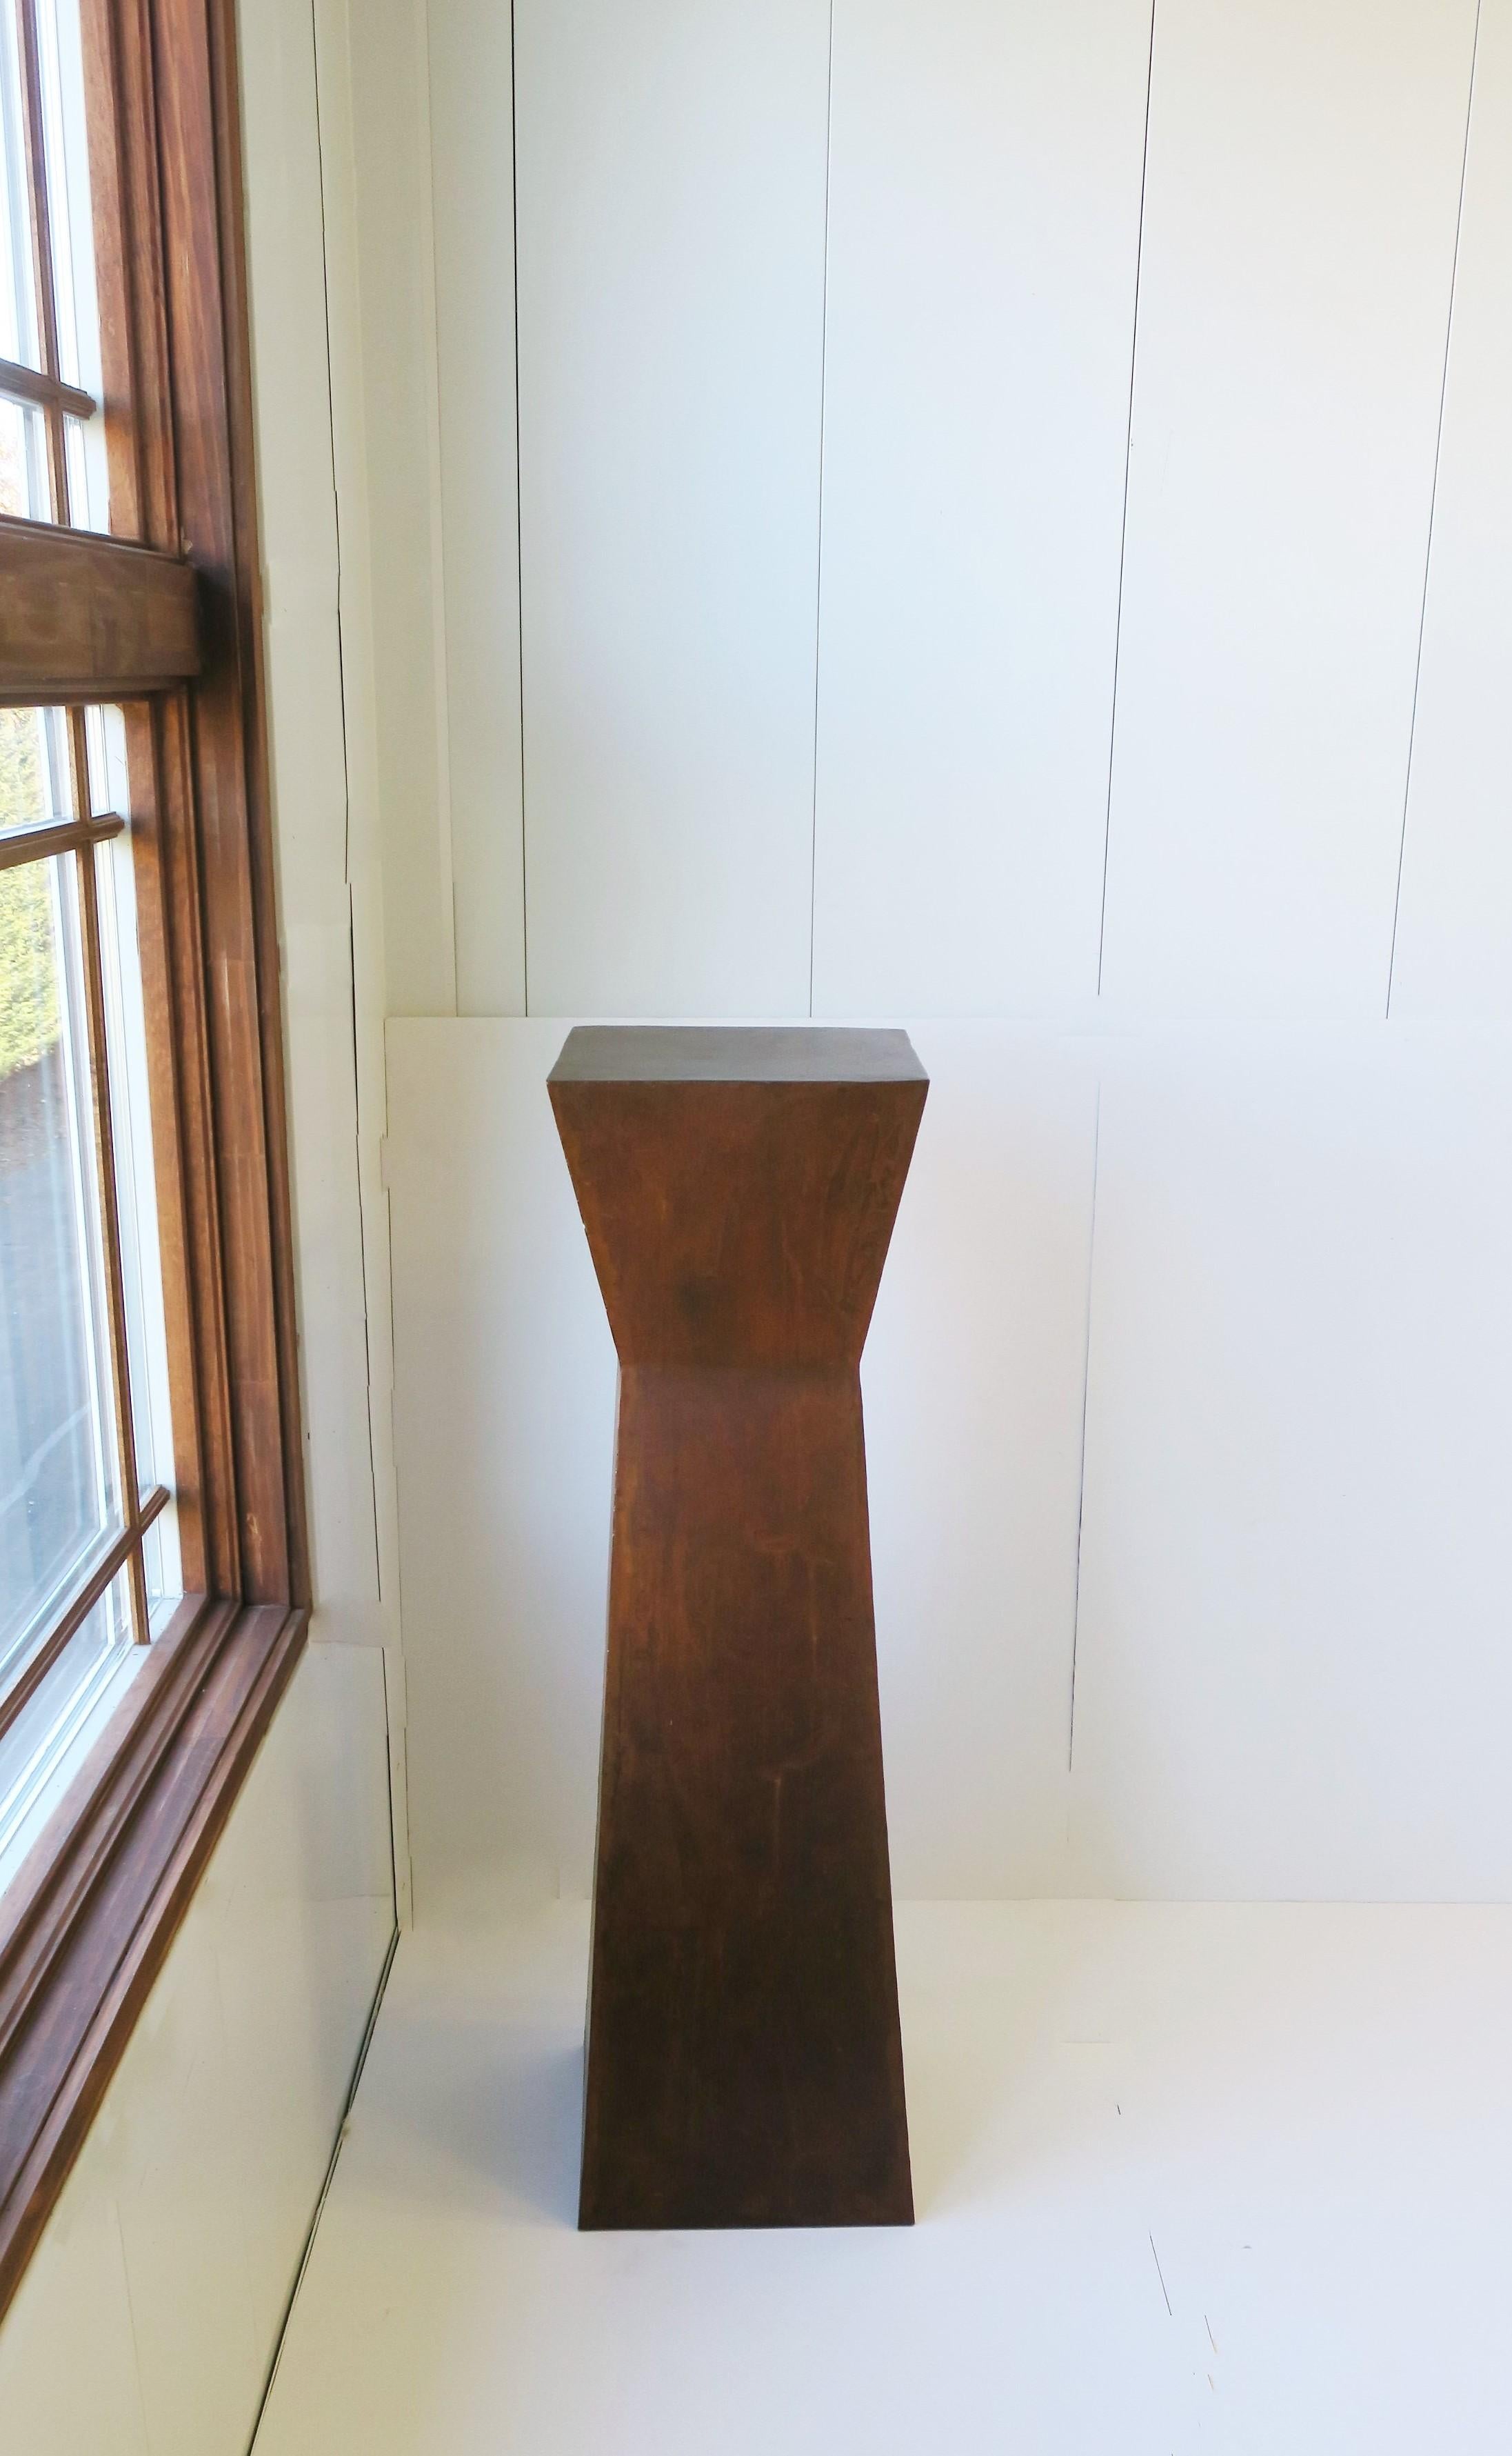 **This is one of two pillars shown; this pillar is the taller of the two, the lower pillar has sold. 

An industrial minimalist weathered metal pedestal pillar column stand, circa late-20th century. Intentionally weathered/distressed metal pedestal